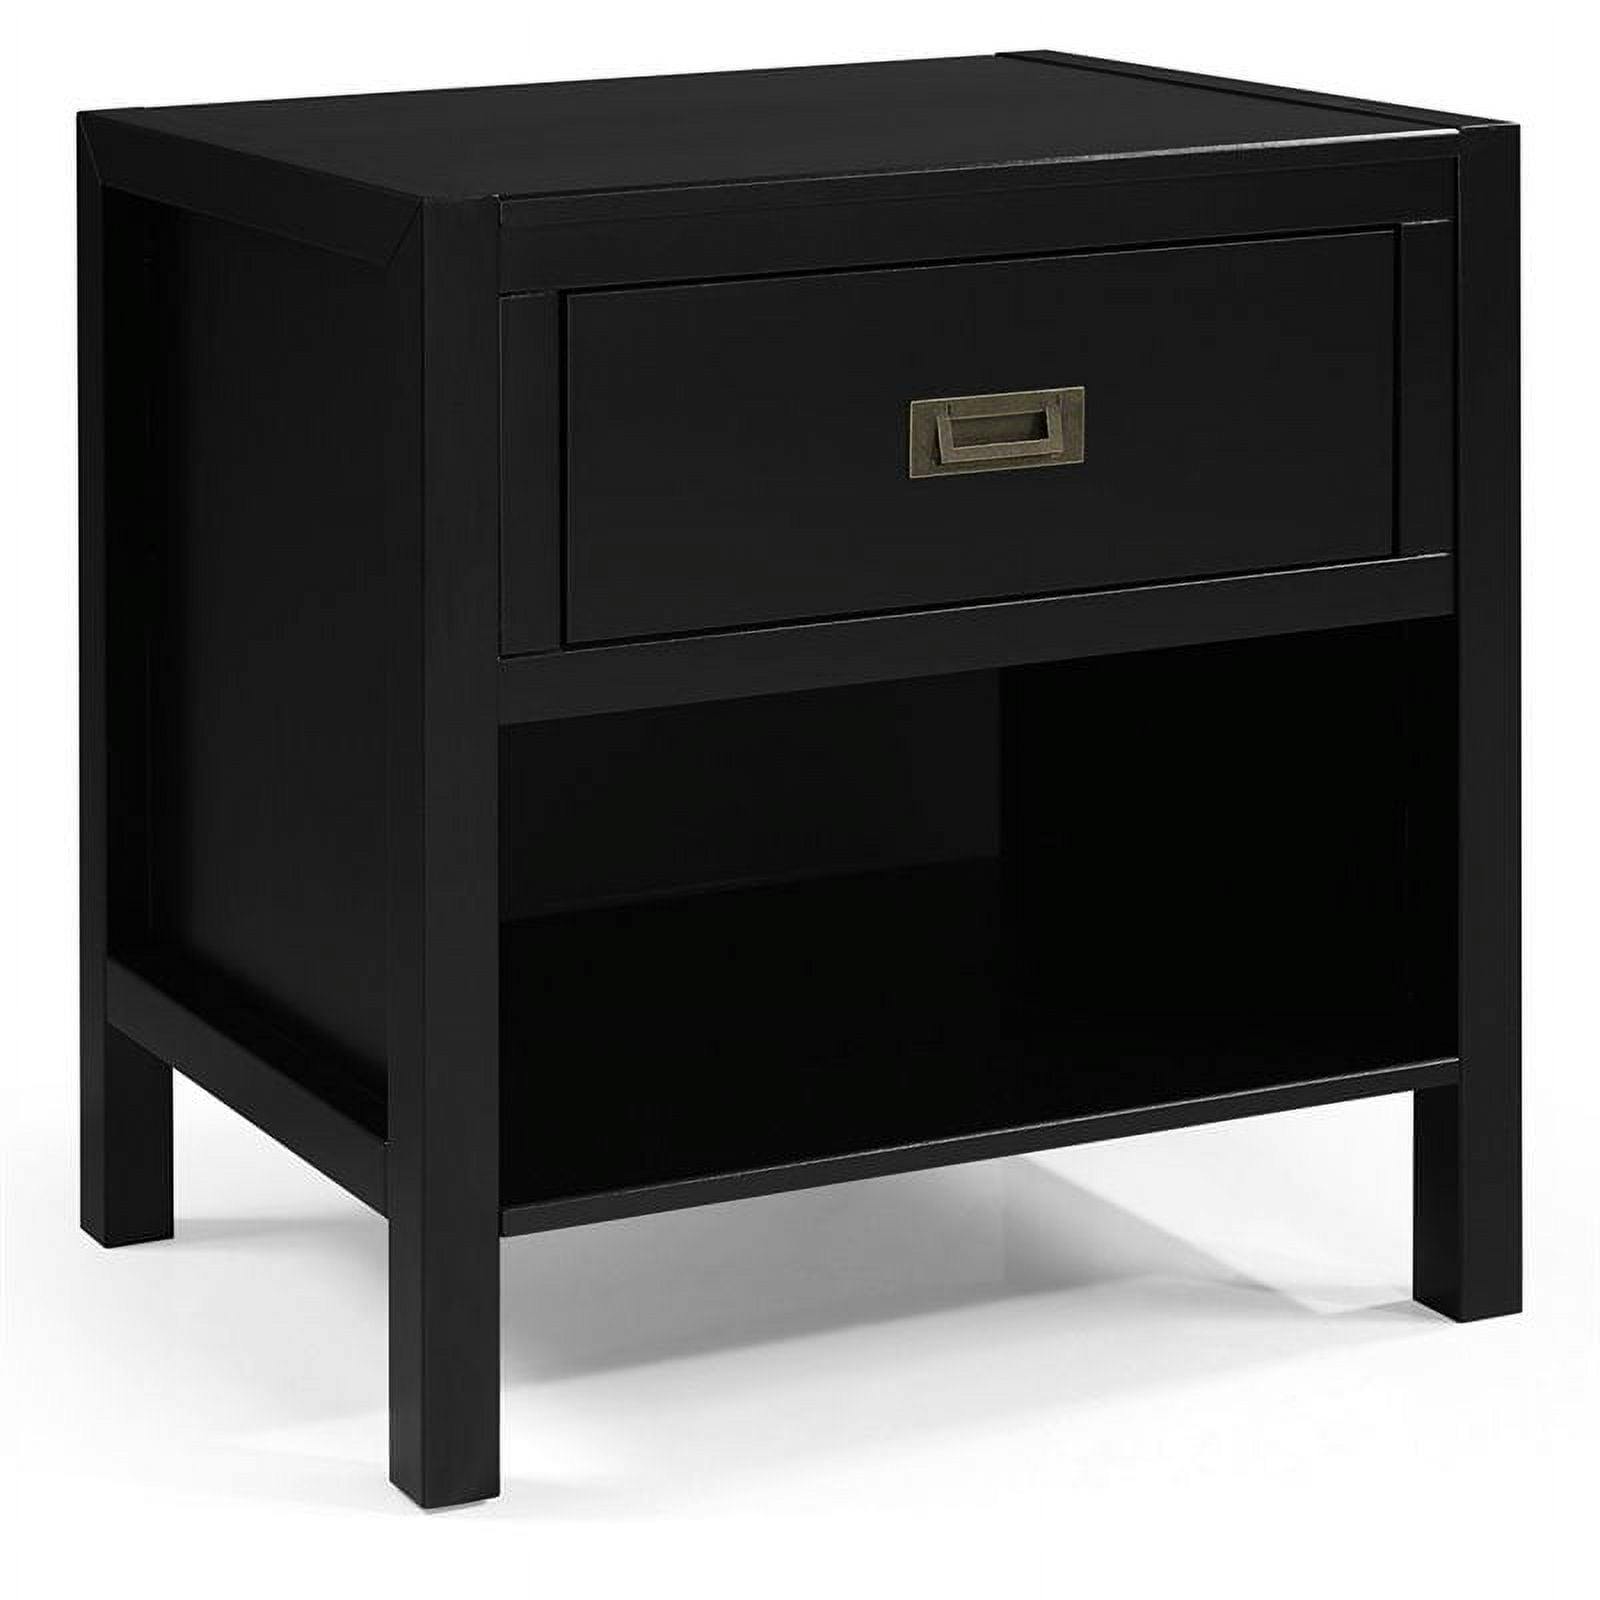 Mid-Century Modern Black Solid Wood Nightstand with Storage Cubby